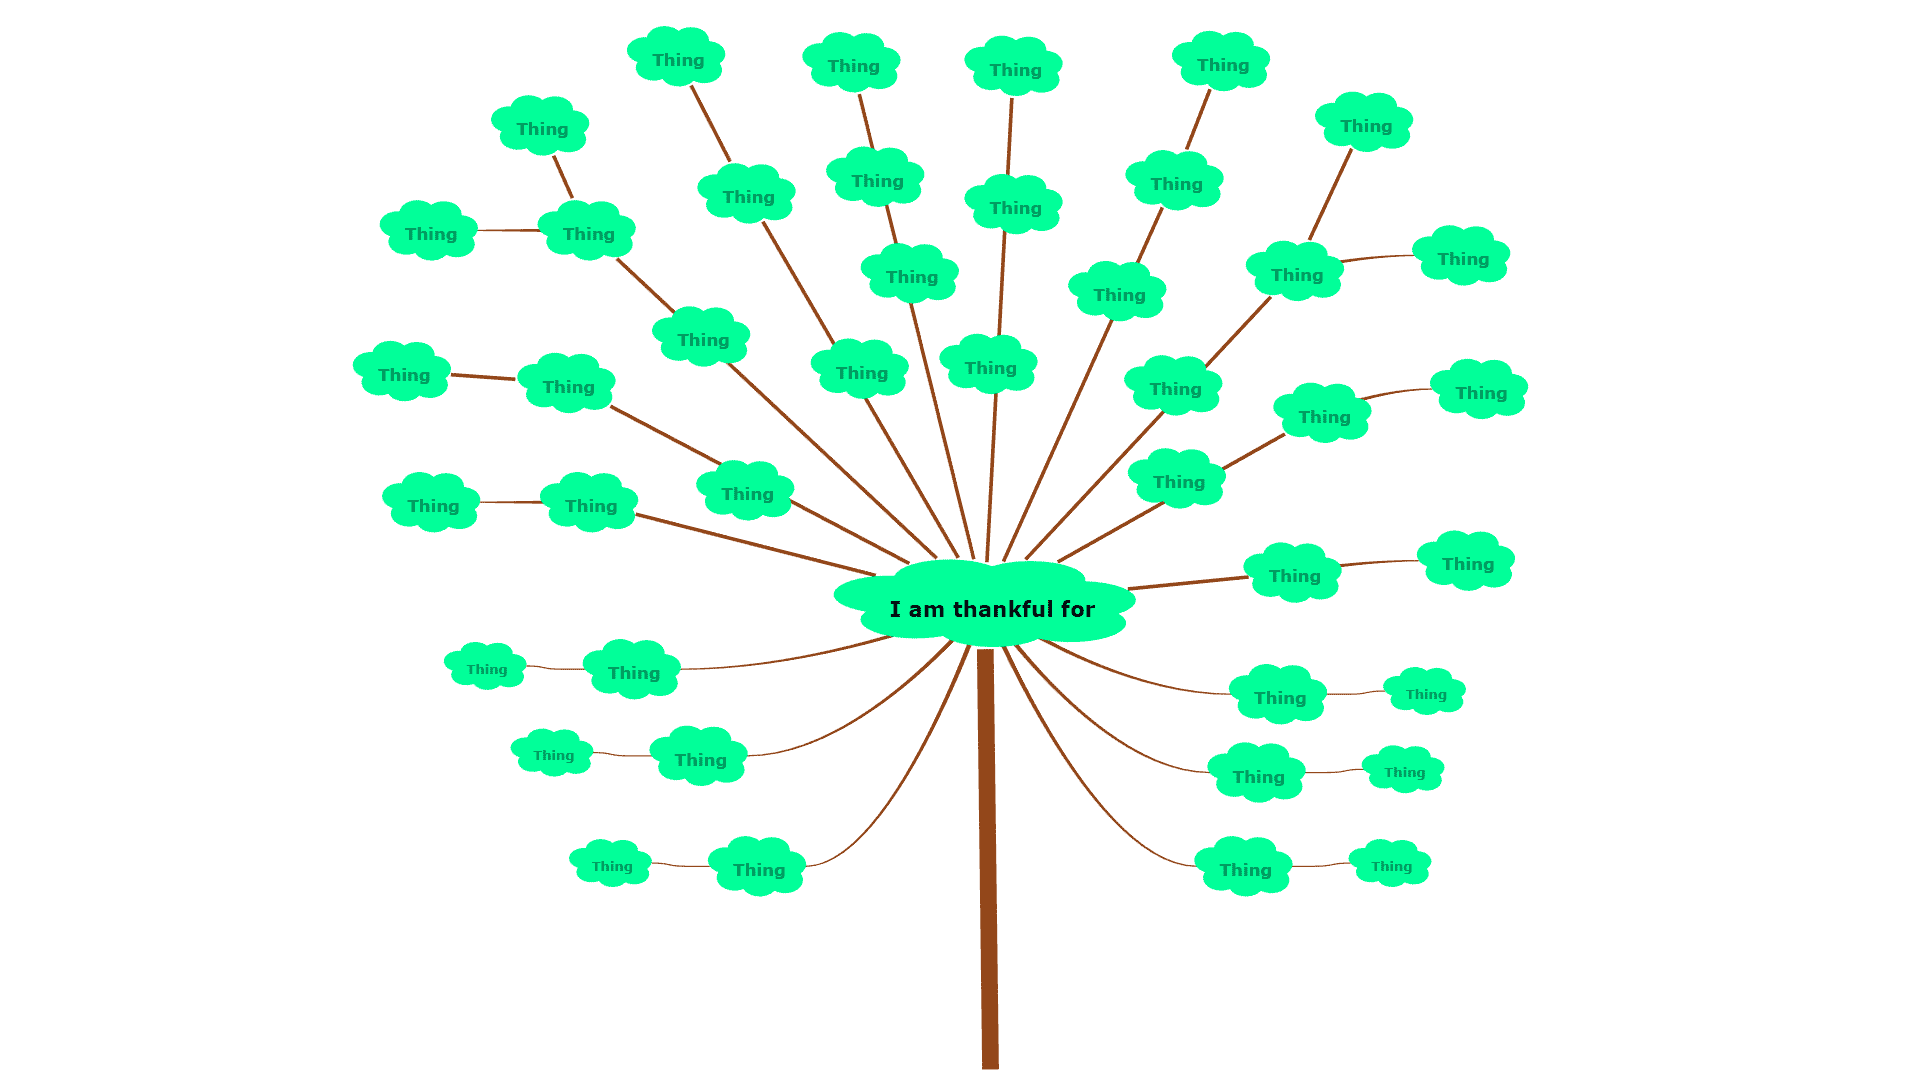 thankful tree personal mind map about your blessings